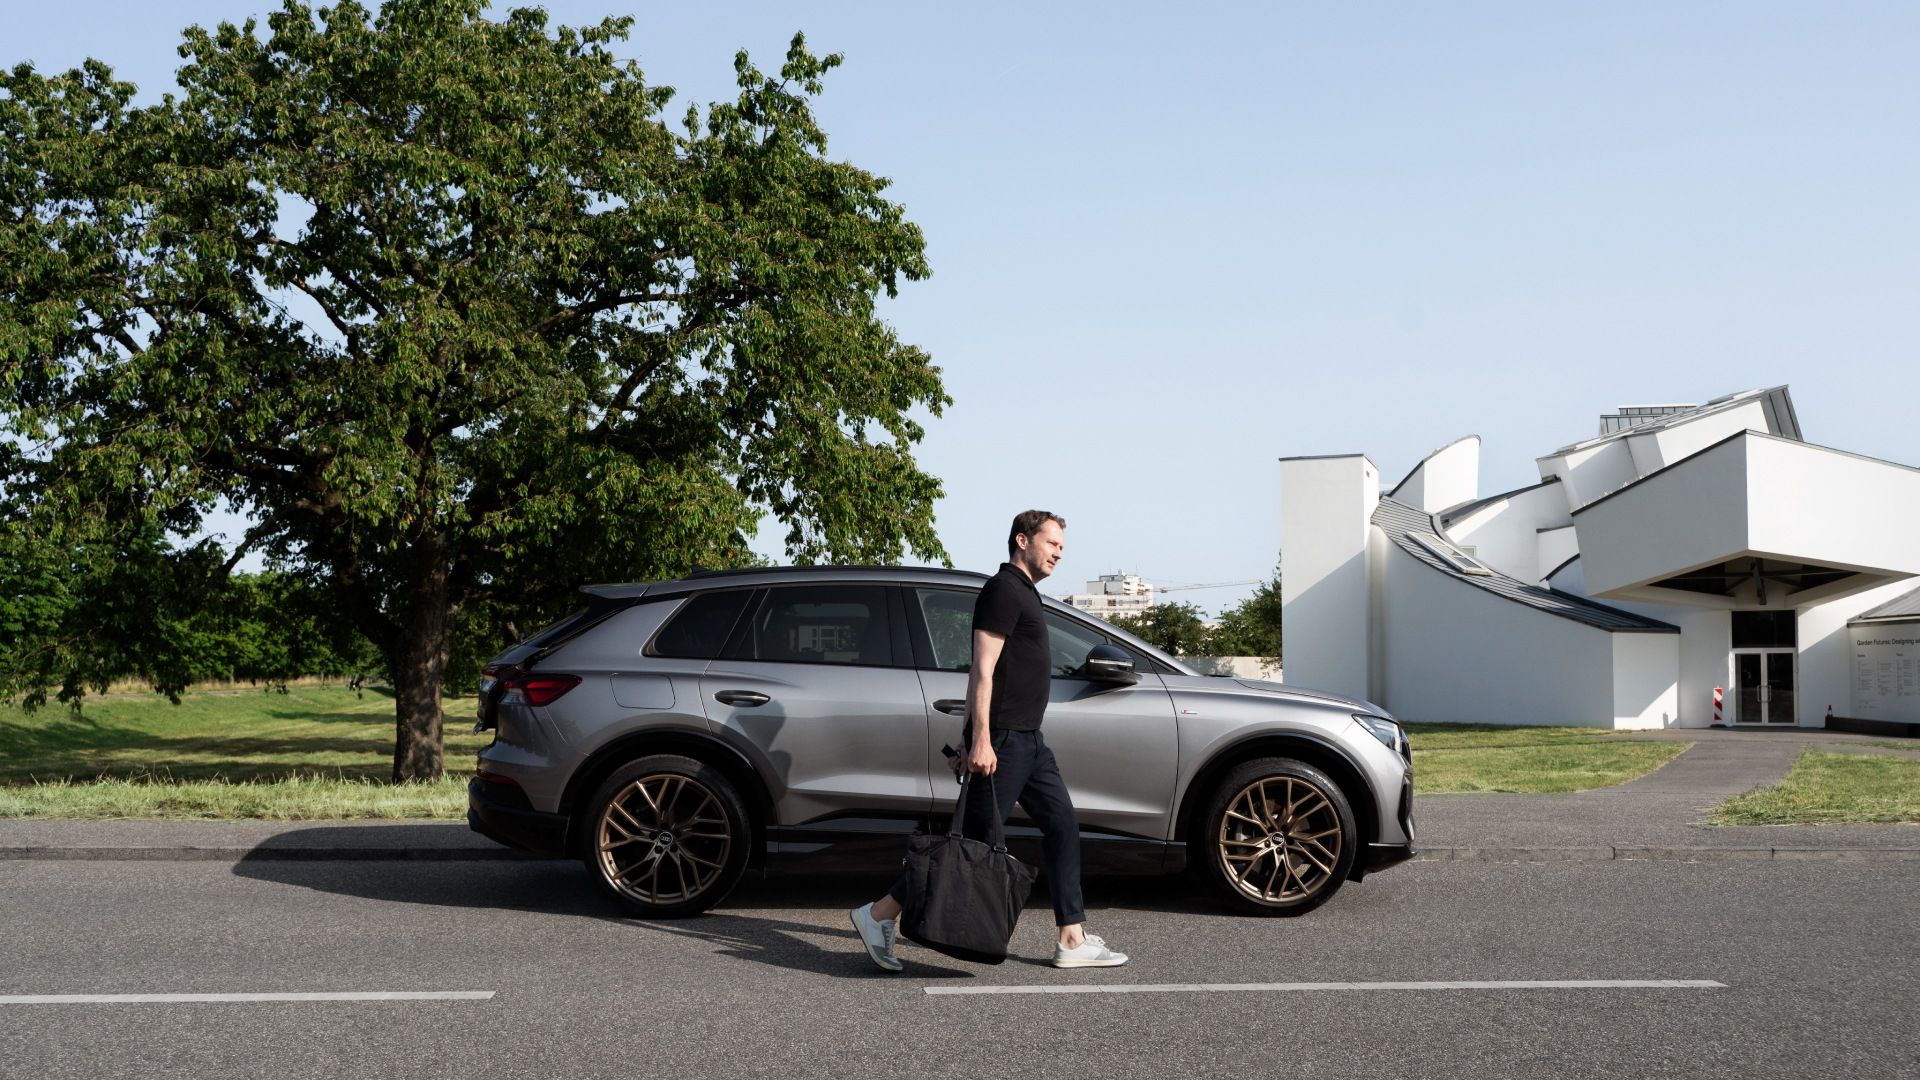 Dr Mateo Kries and the Audi Q4 e-tron in front of the Vitra Design Museum.